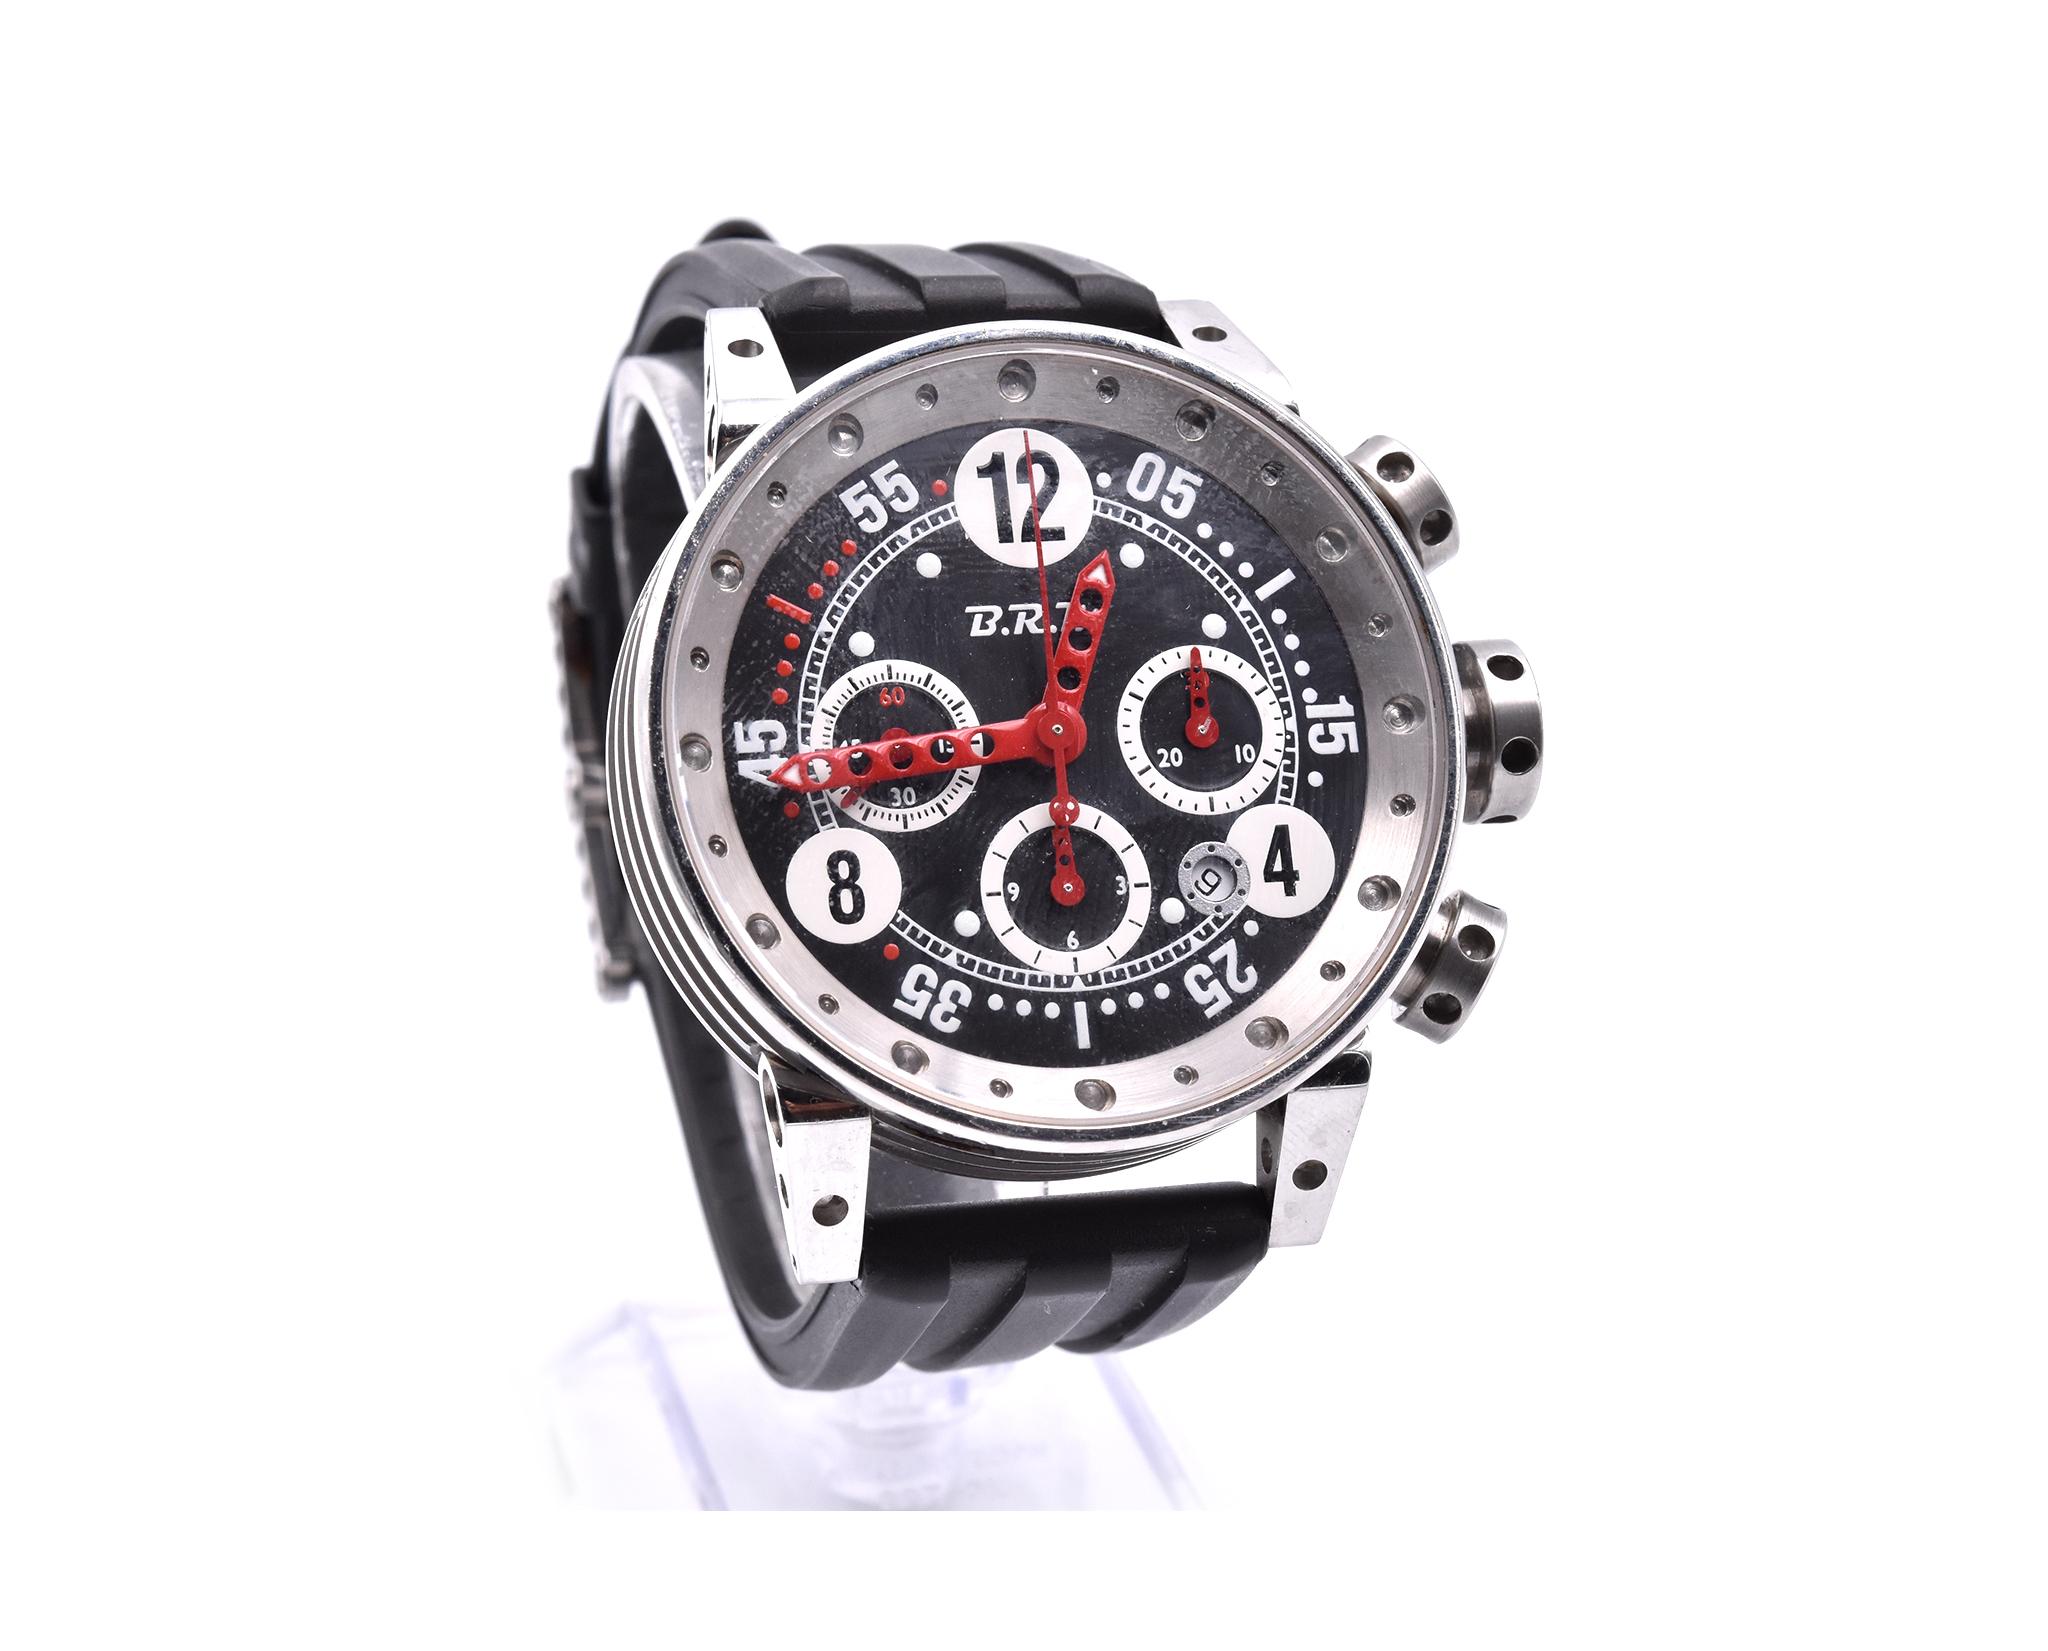 Movement: automatic
Function: hours, minutes, seconds, chronograph, date
Case: 44mm stainless steel case with fixed bezel, pull/push crown and pushers, sapphire protective crystal
Band: black rubber strap with steel buckle
Dial: black dial, red